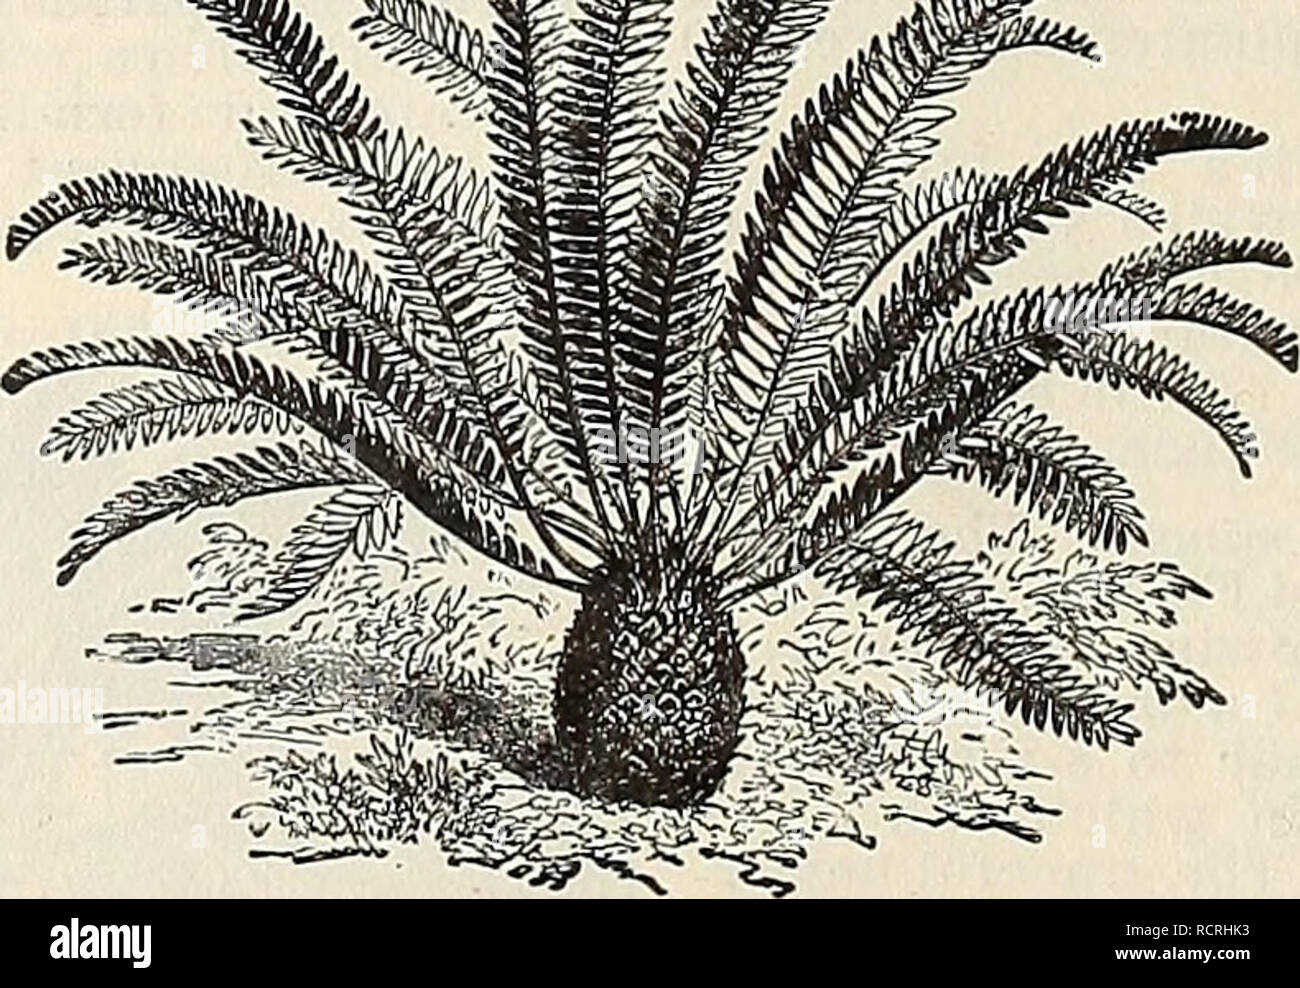 . Descriptive and illustrated catalogue and manual / Royal Palm Nurseries. Nurseries (Horticulture) Florida Catalogs; Tropical plants Catalogs; Fruit trees Seedlings Catalogs; Citrus fruit industry Catalogs; Fruit Catalogs; Plants, Ornamental Catalogs. THRINAX EXCELSA. ZAMIA integrifolia.* A beautiful Cycad, known in South Florida as &quot;Comptie&quot;'or &quot;Coontie.&quot; The Seminoles produce starch from the stems, which is extensively used in pudding in Key West and elsewhere. A considerable business is being made of gathering plants for the above purpose by entei'prising settlers. An e Stock Photo